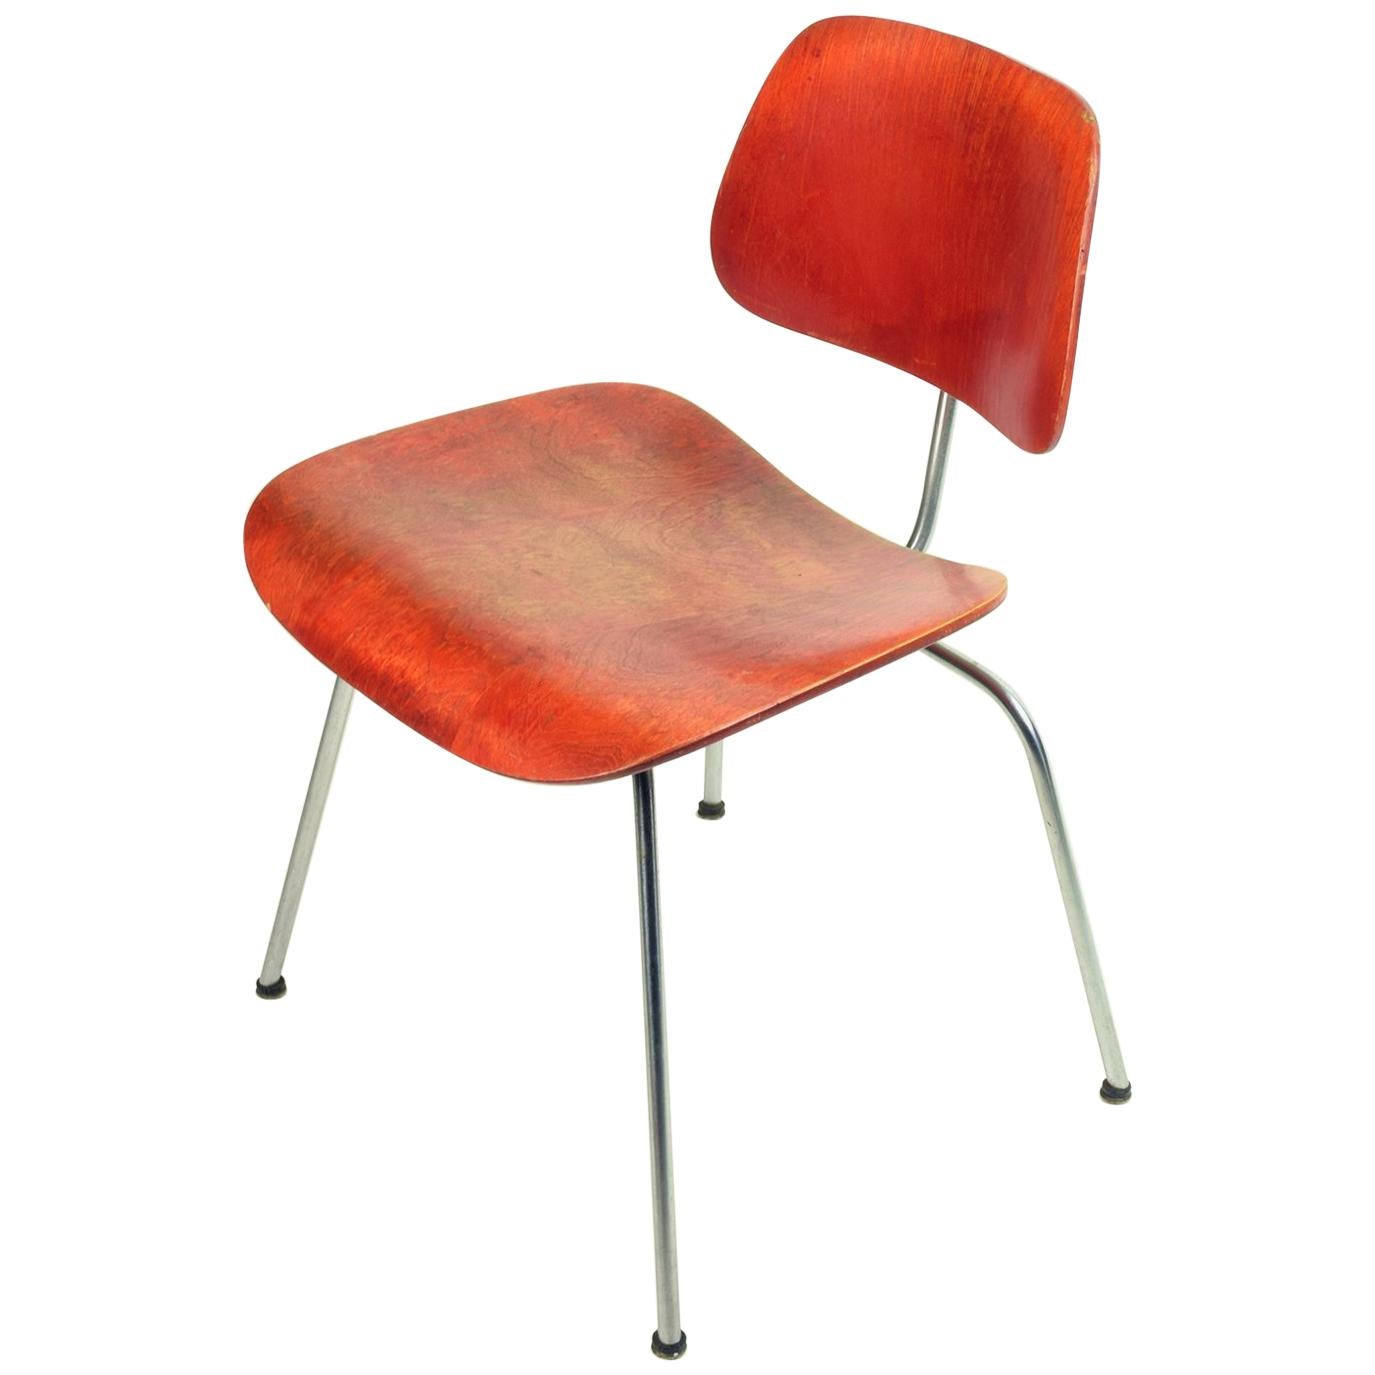 Charles & Ray Eames, 'DCM' Chair for Herman Miller, Stunning Early Version